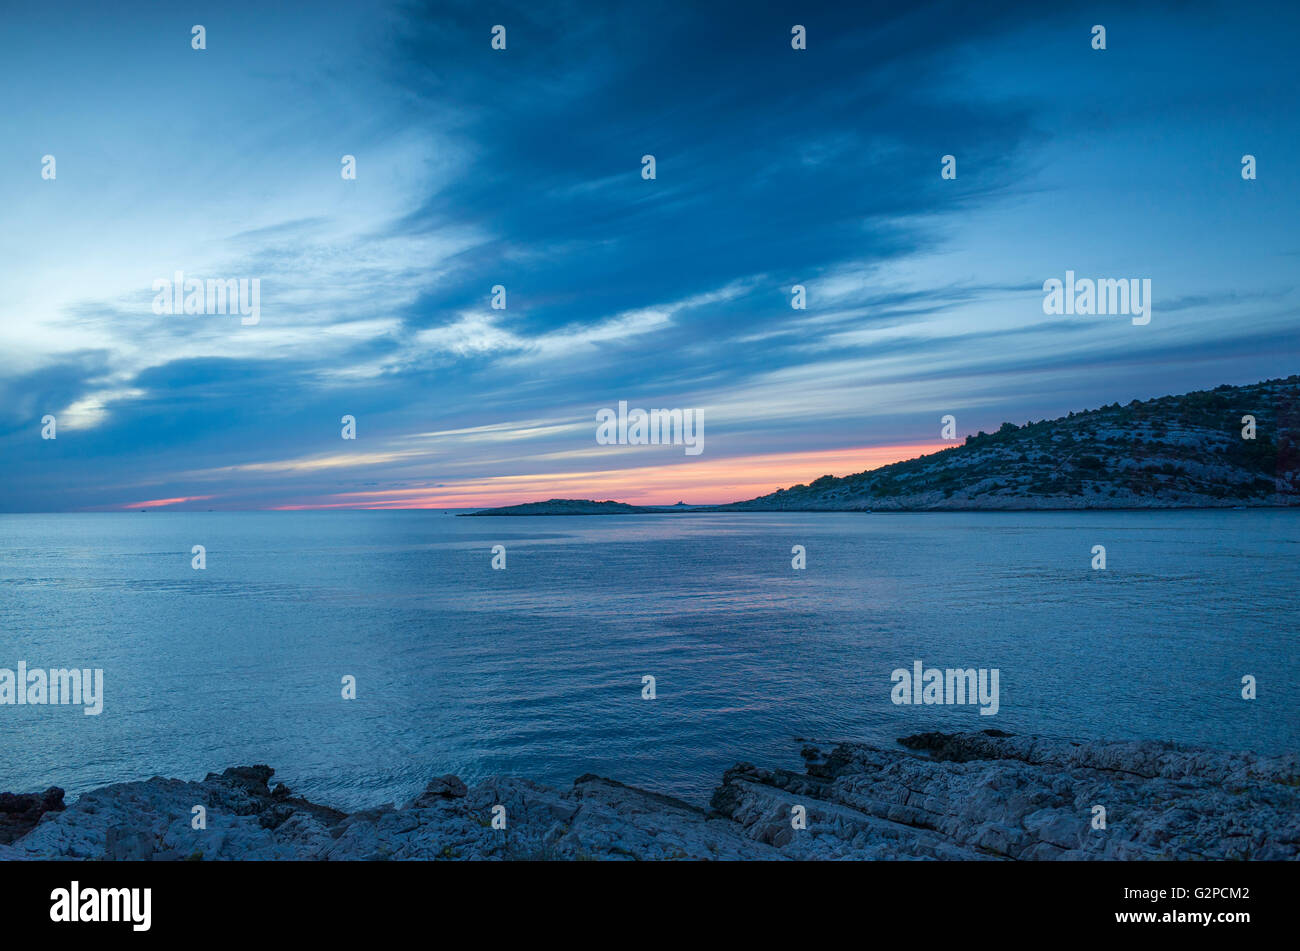 Razanj Croatia Europe. Landscape and nature photo. Adriatic Sea at dawn after sunset. Calm blue warm summer evening with beautiful colors and tones. Stock Photo